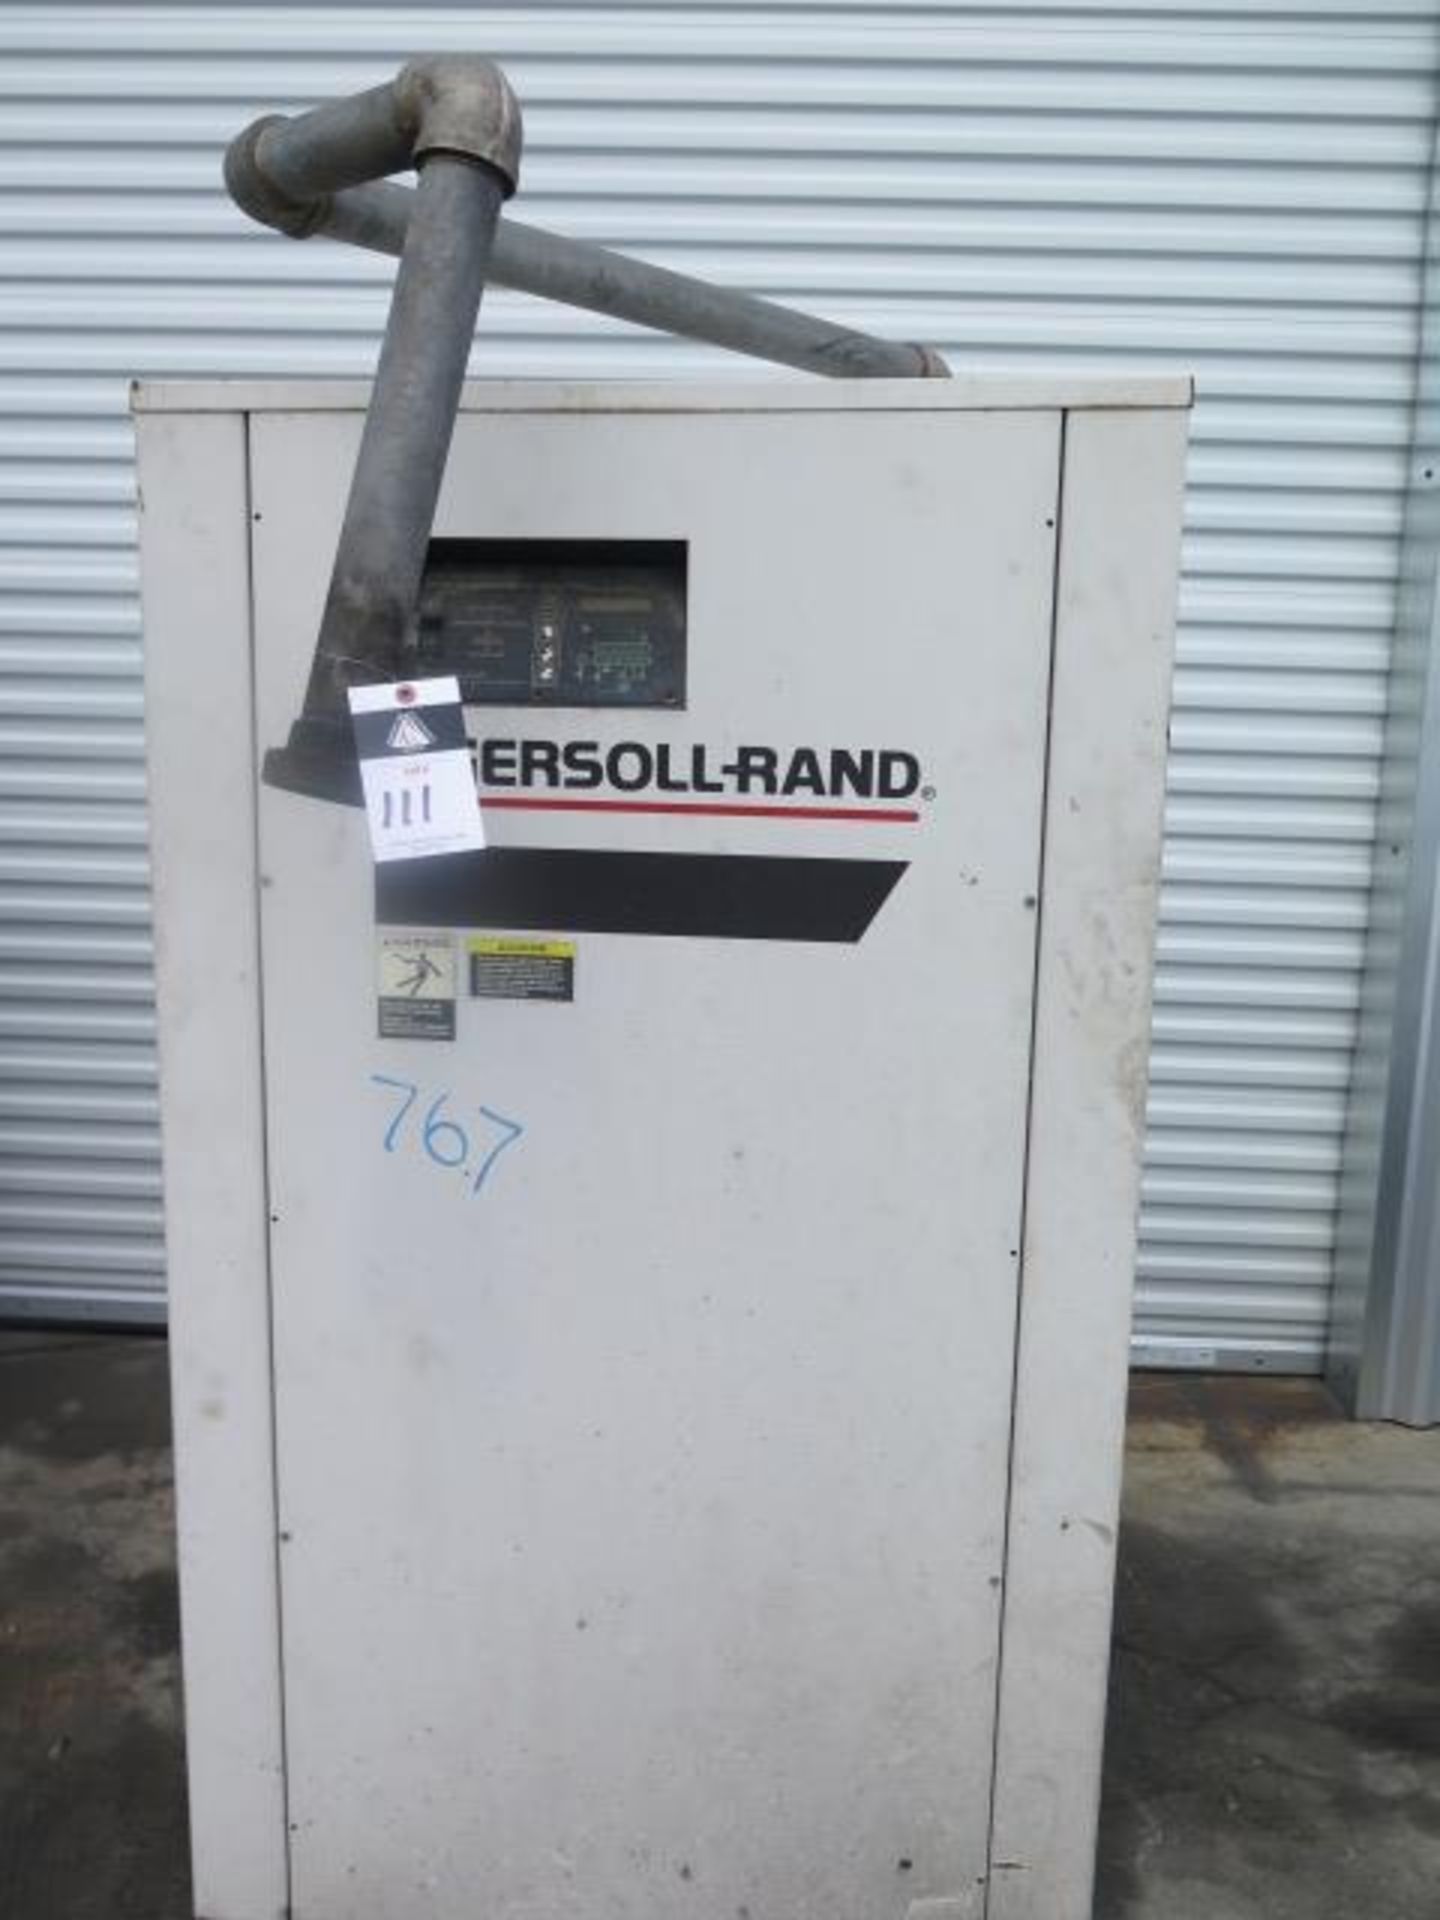 Ingersoll Tand DXR425 Refrigerated Air Dryer s/n 98ADXR0108 (SOLD AS-IS - NO WARRANTY)